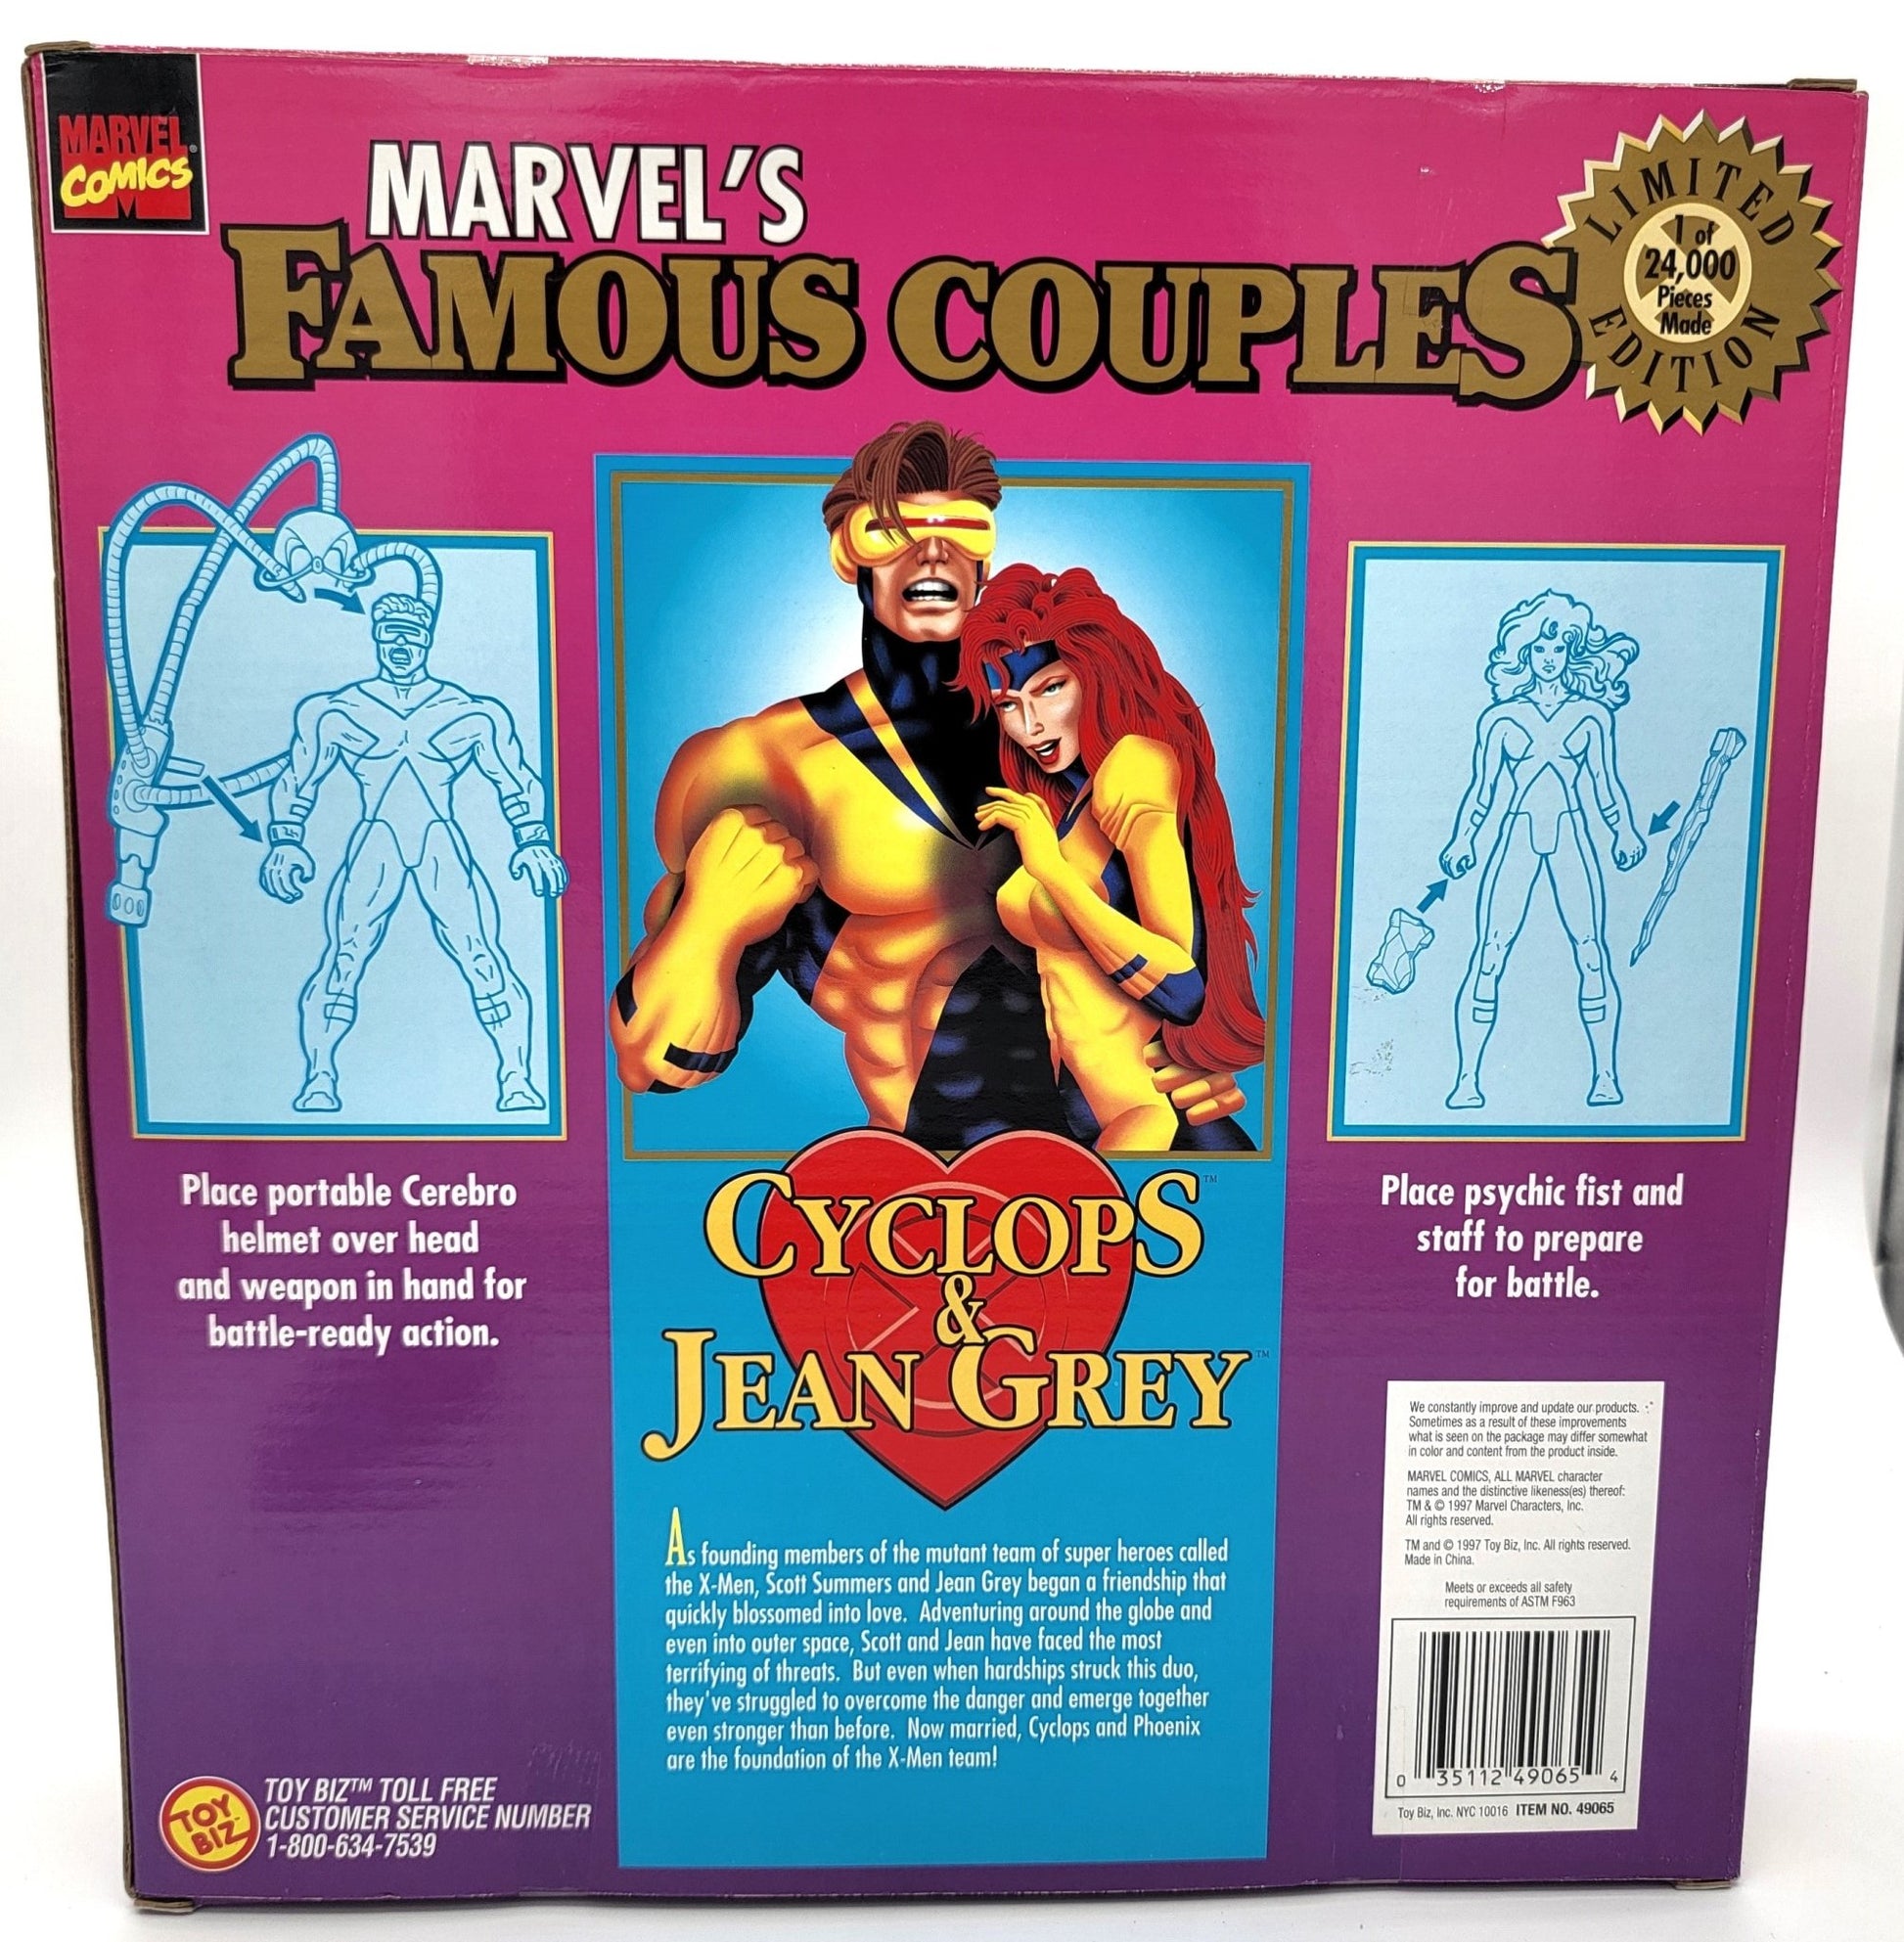 Toy Biz - Toy Biz | Marvel's Famous Couples - Cyclops & Jean Grey 1997 | Limited Edition - Vintage Action Figure - Action Figures - Steady Bunny Shop